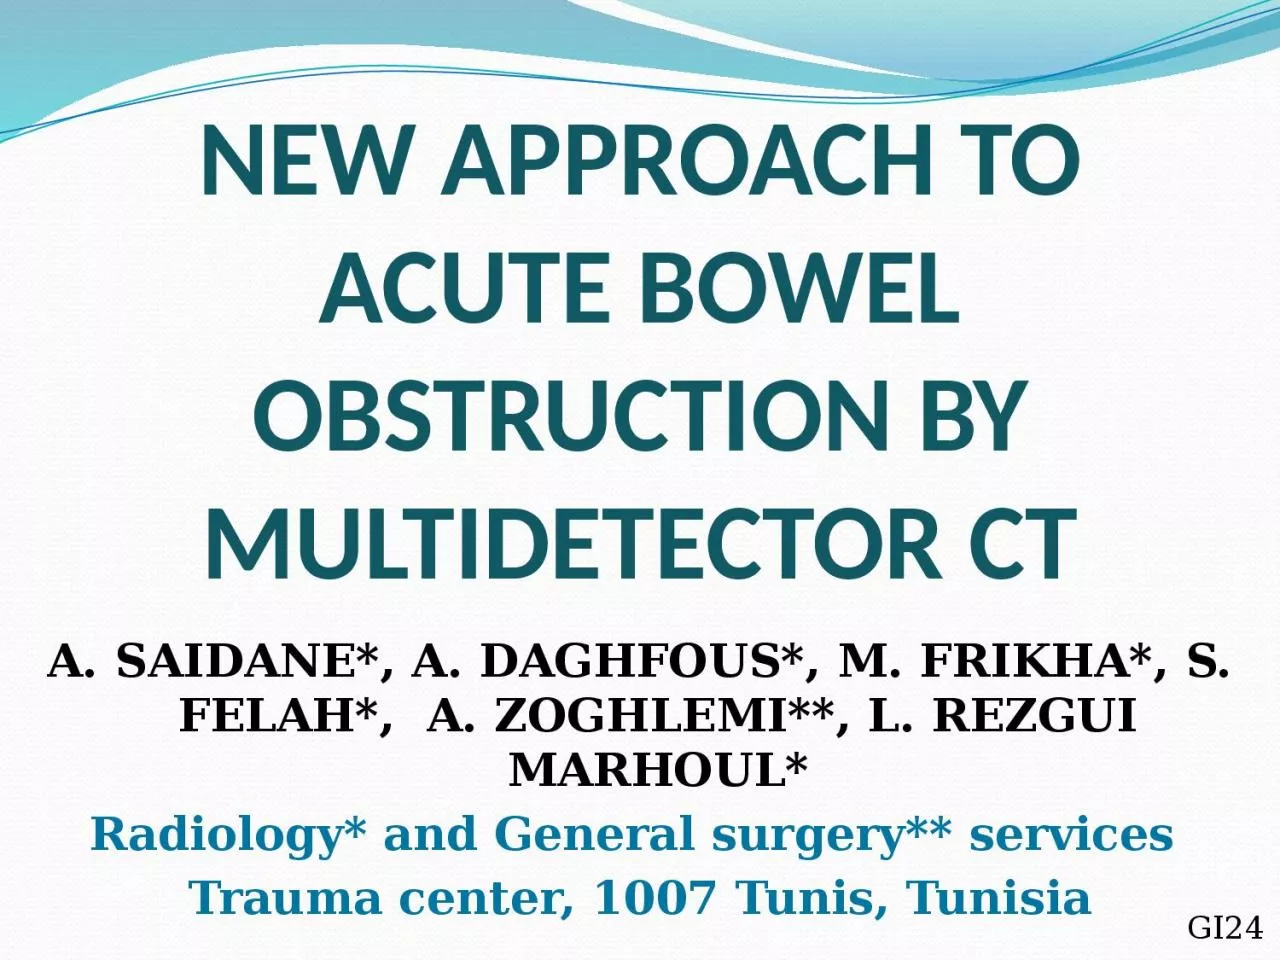 NEW APPROACH TO ACUTE BOWEL OBSTRUCTION BY MULTIDETECTOR CT